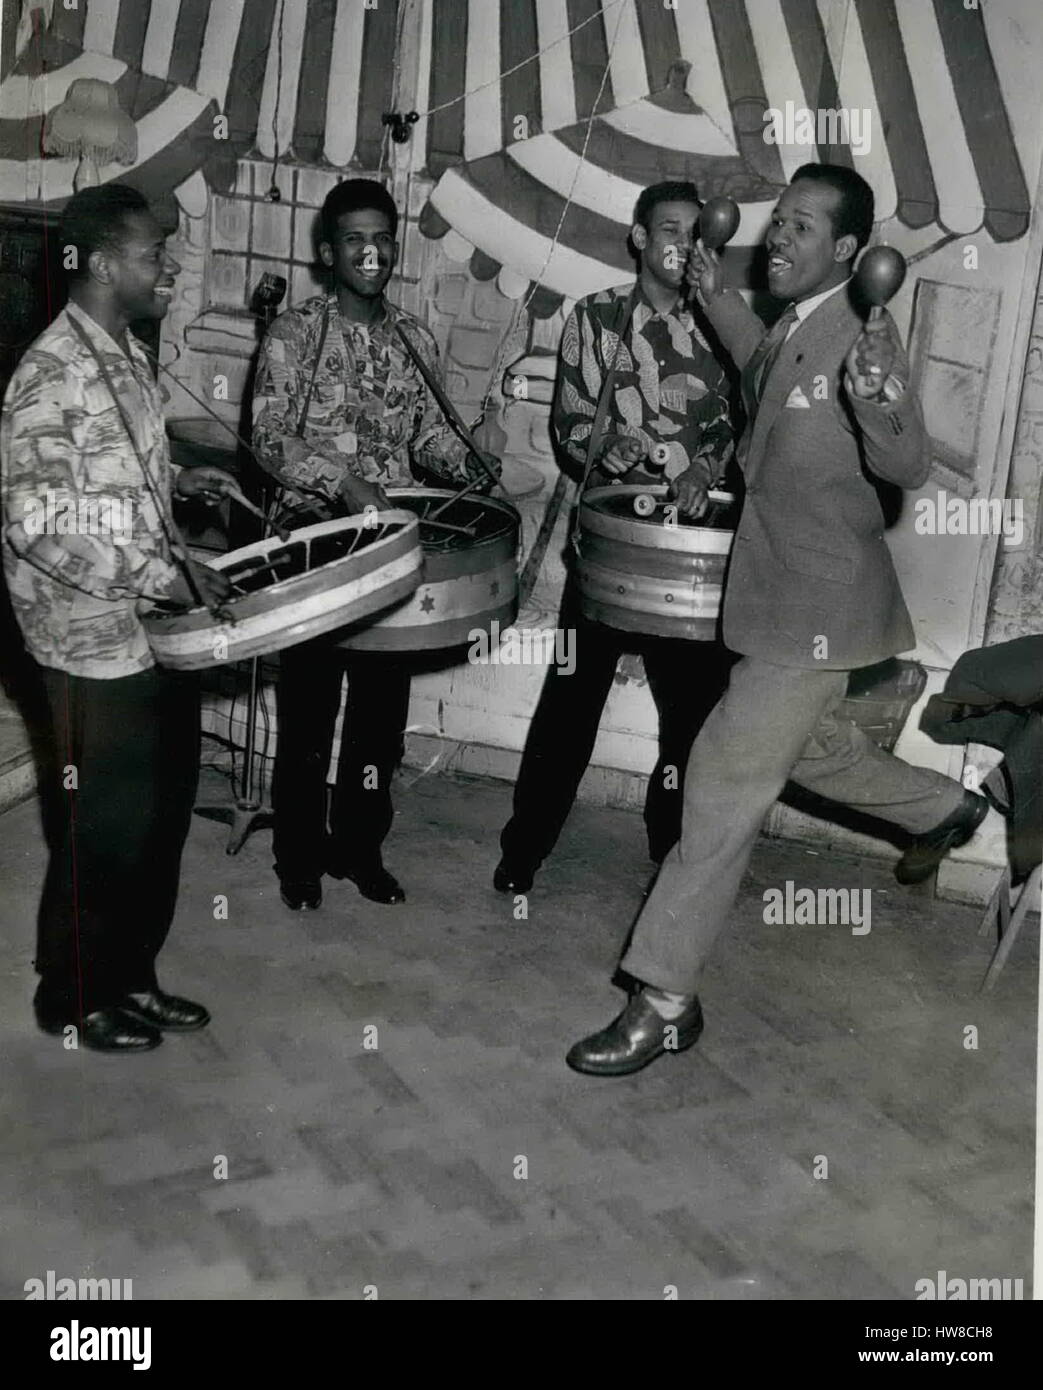 1955 - McDonald Bailey wants to put ''Steel Bands'' on the map : Famous athletic McDonald Balley who had done so much for sport and a lot in putting Trinidad on the map in the field of Athletics - is new very keen that people should know more of the culture of his county. For that reason he is encouraging the Trained All-Steel orchestra and has offered to appear with them on T.V. The All-Steel orchestra is something that comes exclusively from Tragedian. It was born in the Island's slums. when the boys, having no work or money and yet wanting to indulge in their inherited love of music made dr Stock Photo